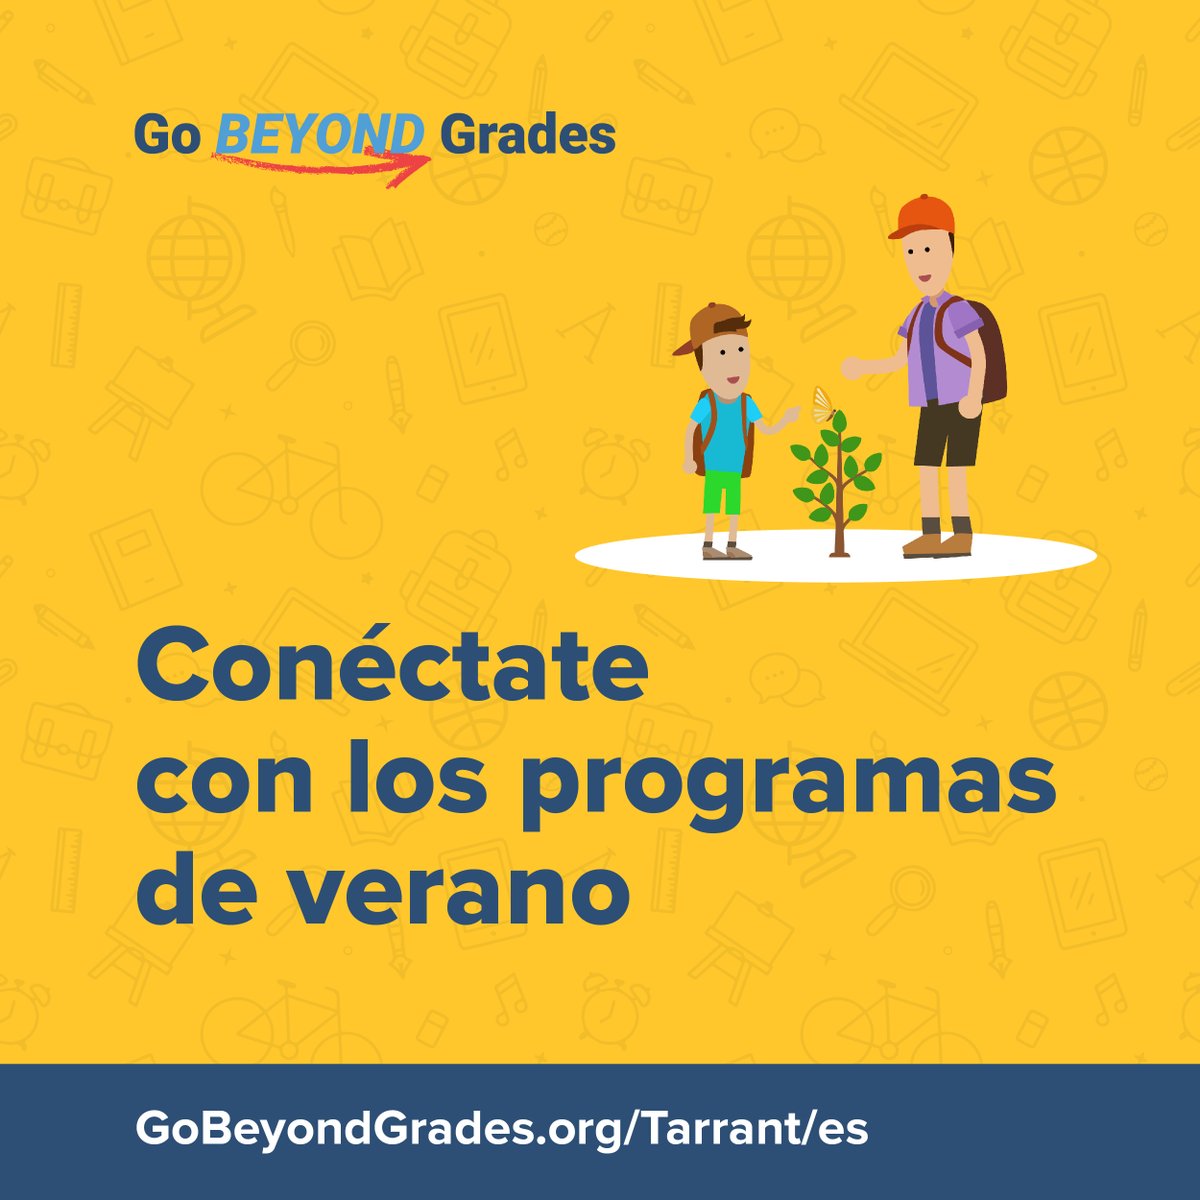 Have fun + support your child’s grade-level progress! Check out the first-of-its-kind Tarrant County search tool for local #summer and after-school programs. 🔎 Get started at GoBeyondGrades.org/Tarrant #GoBeyondGrades #LetsGBGTarrant @bealearninghero